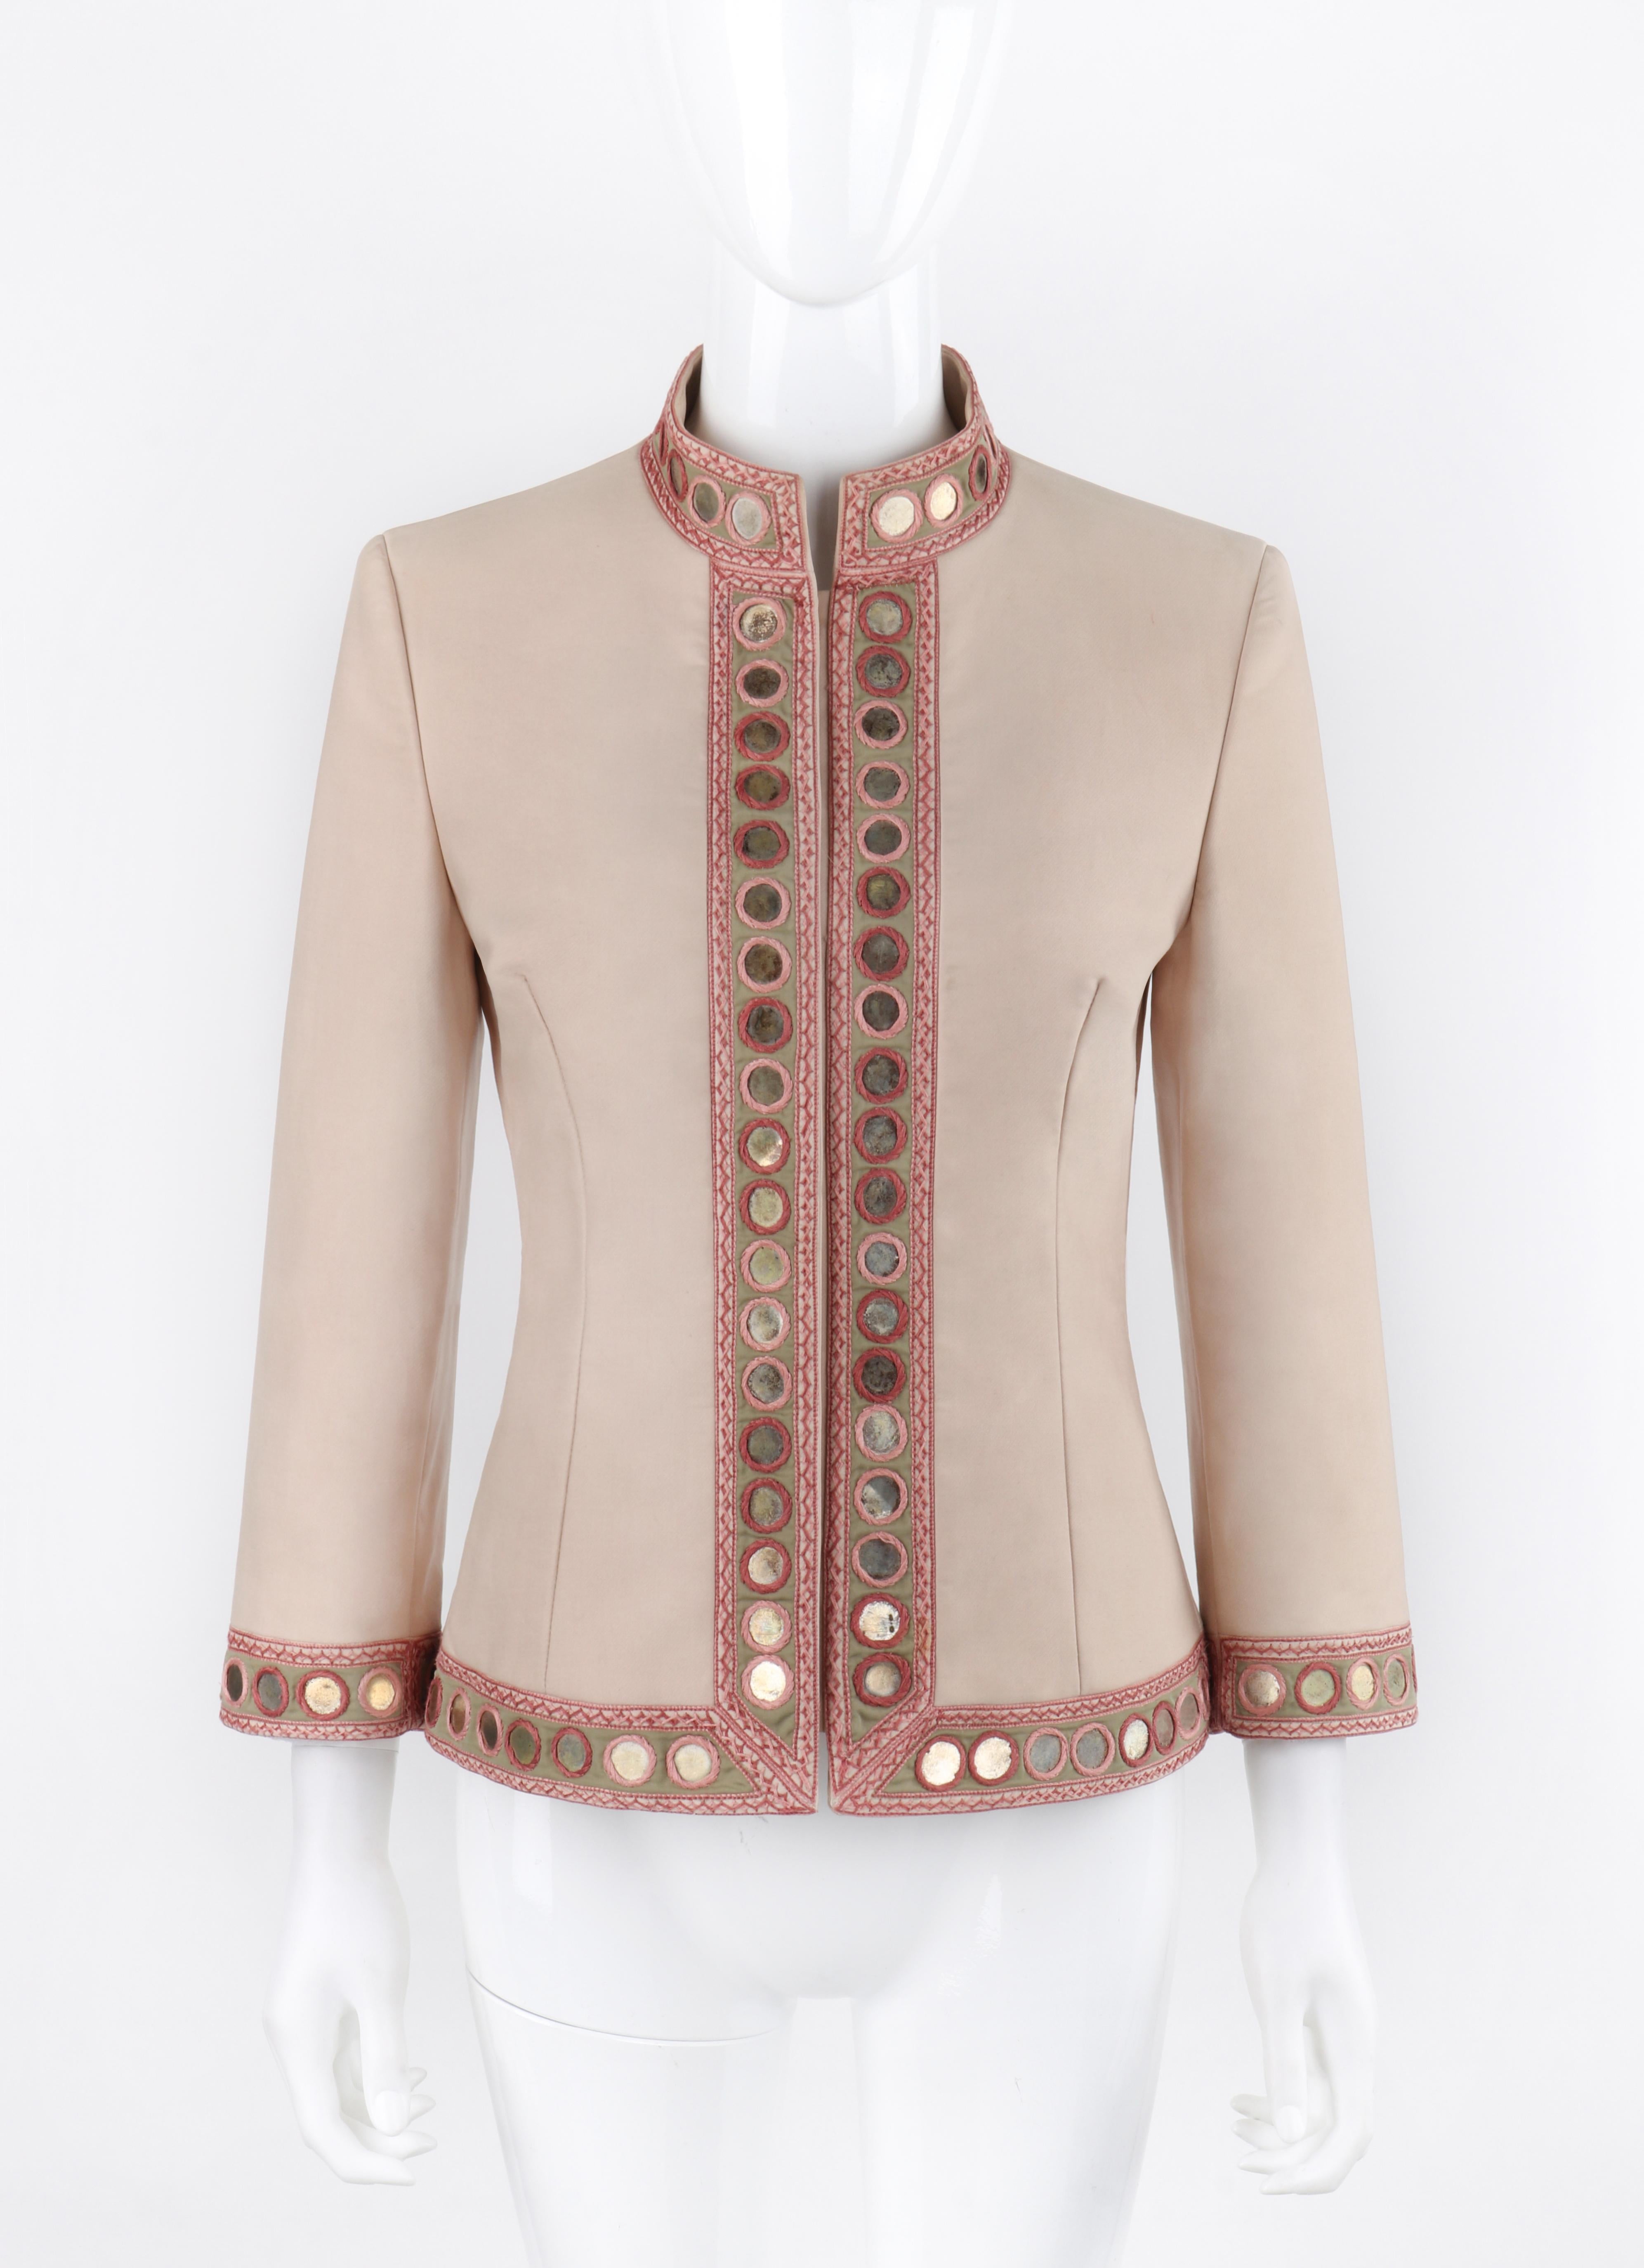 ALEXANDER McQUEEN S/S 2005 Beige Gold Coin Embroidered Collared Button Up Jacket In Fair Condition For Sale In Thiensville, WI